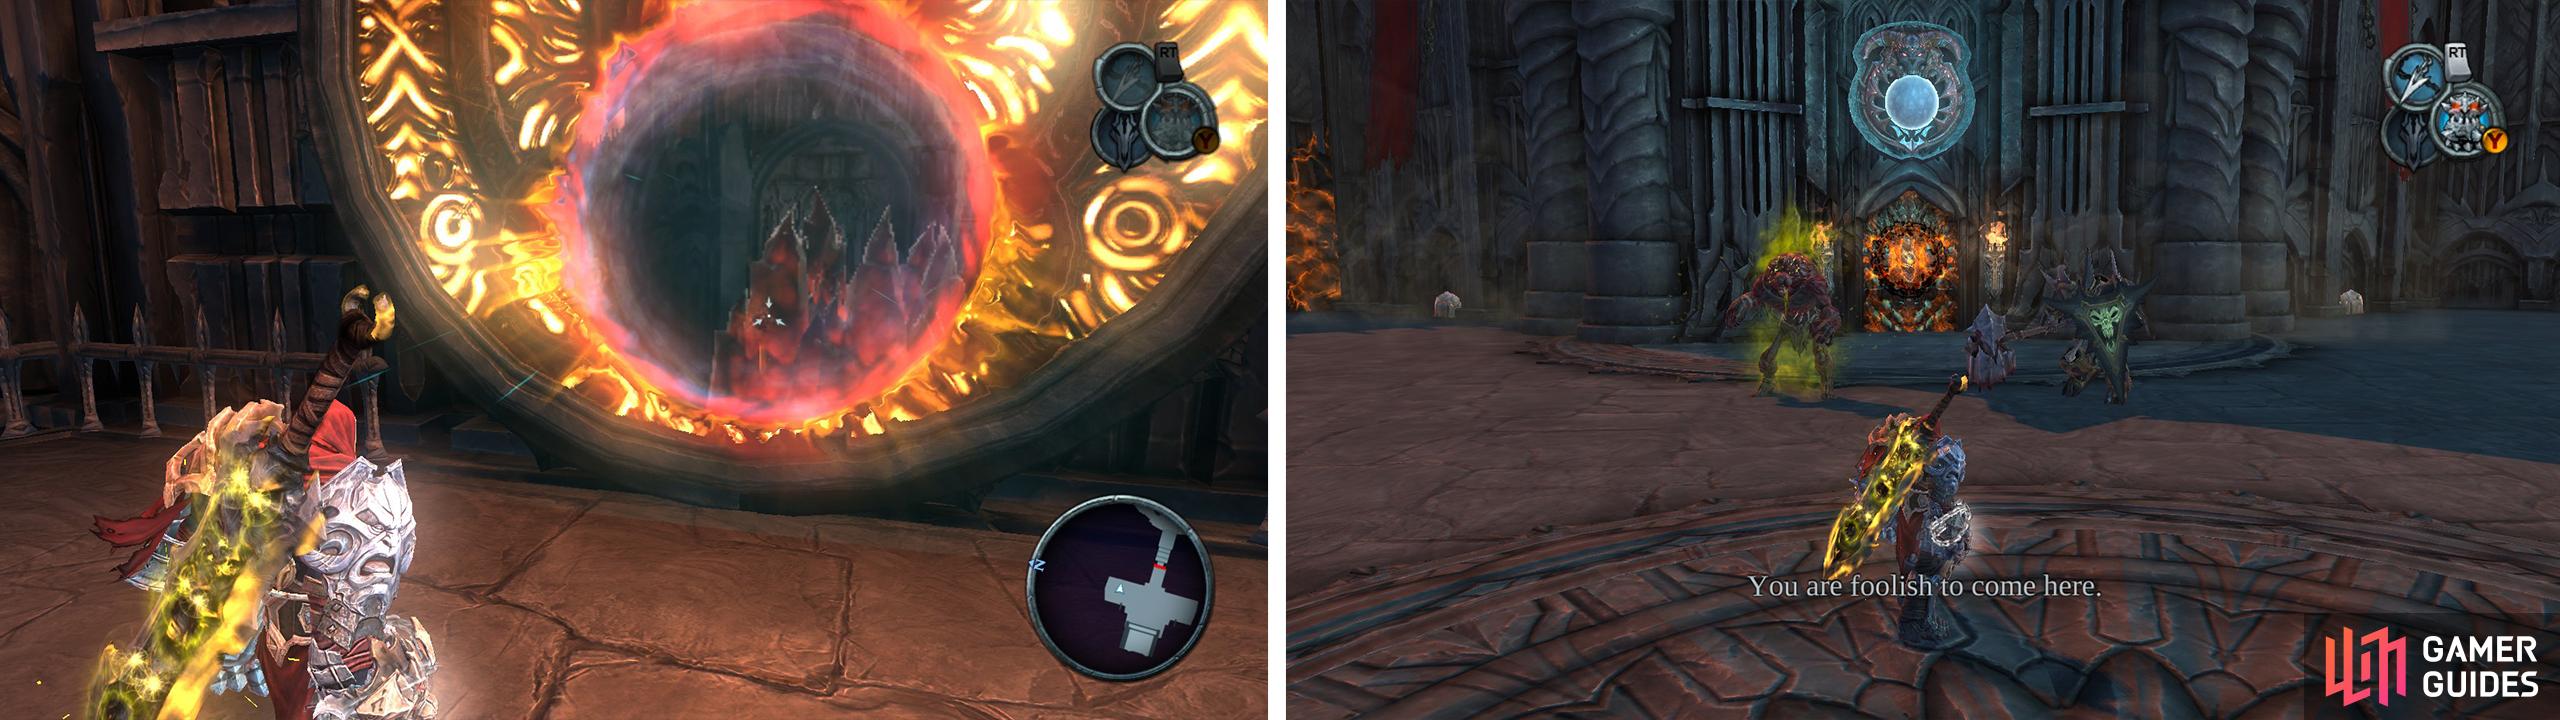 Destroy the red crystals through the portal (left) and then kill the enemies waiting on the far side (right).